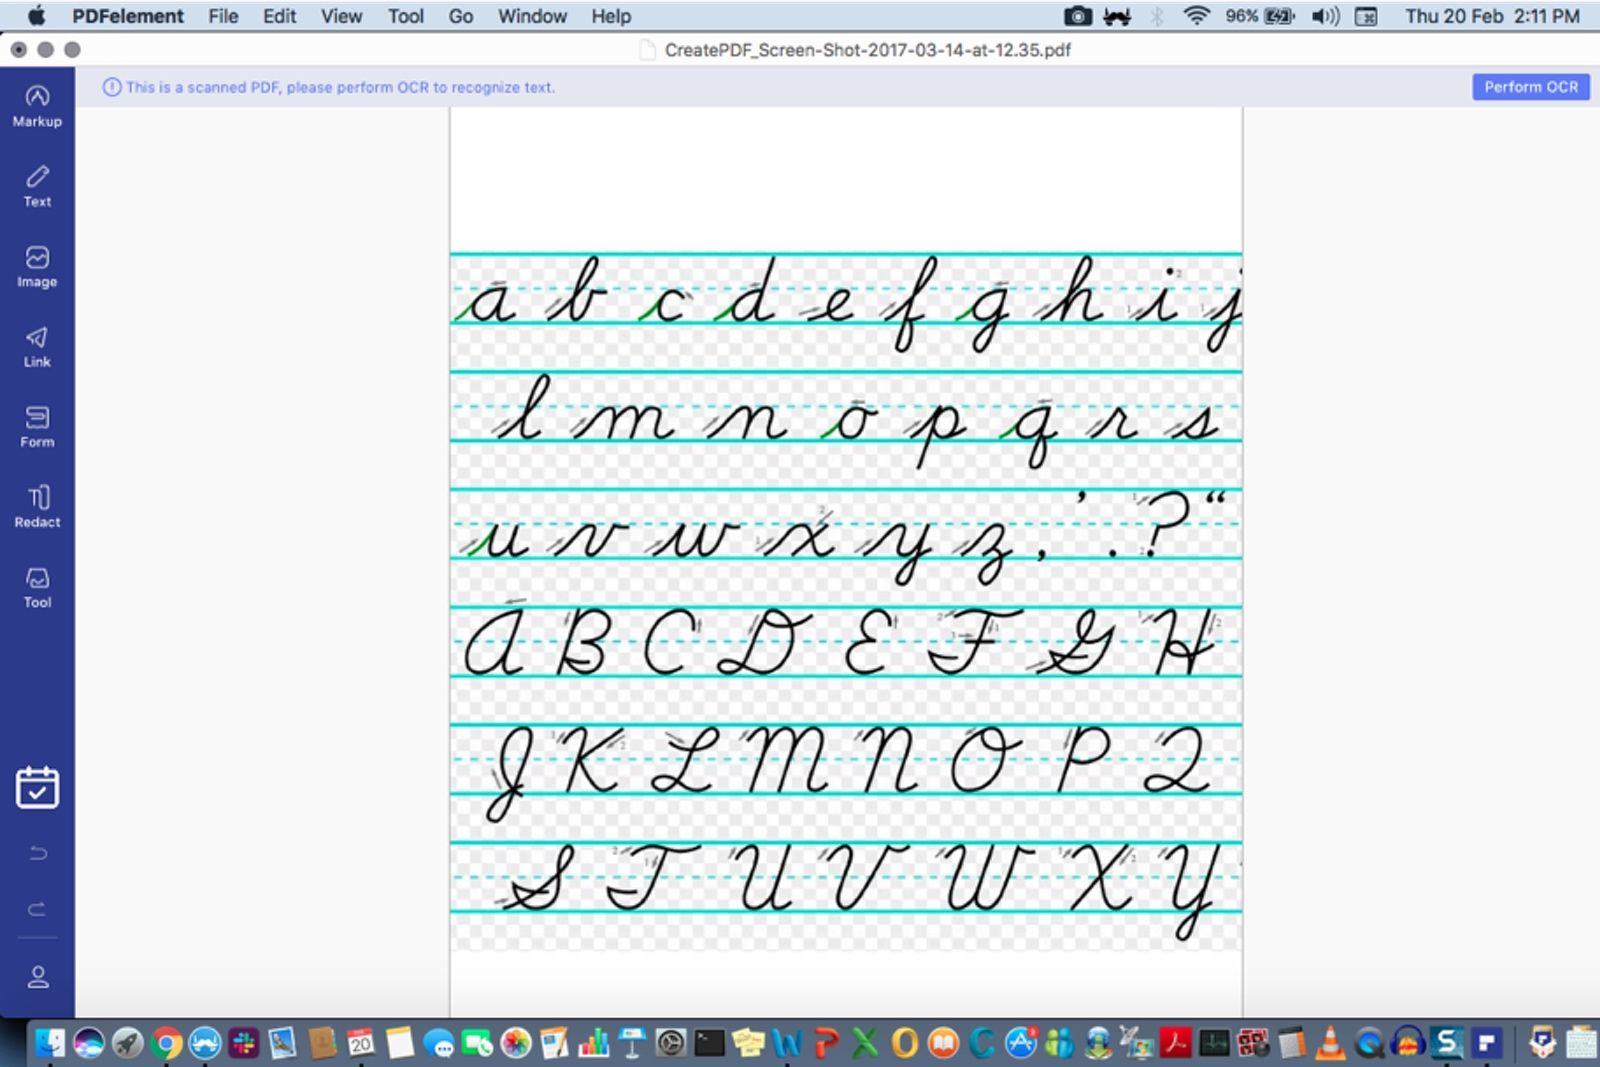 The image shows handwritten text being identified as non-editable and offered to Perform OCR in PDFelement 7 Pro for Mac